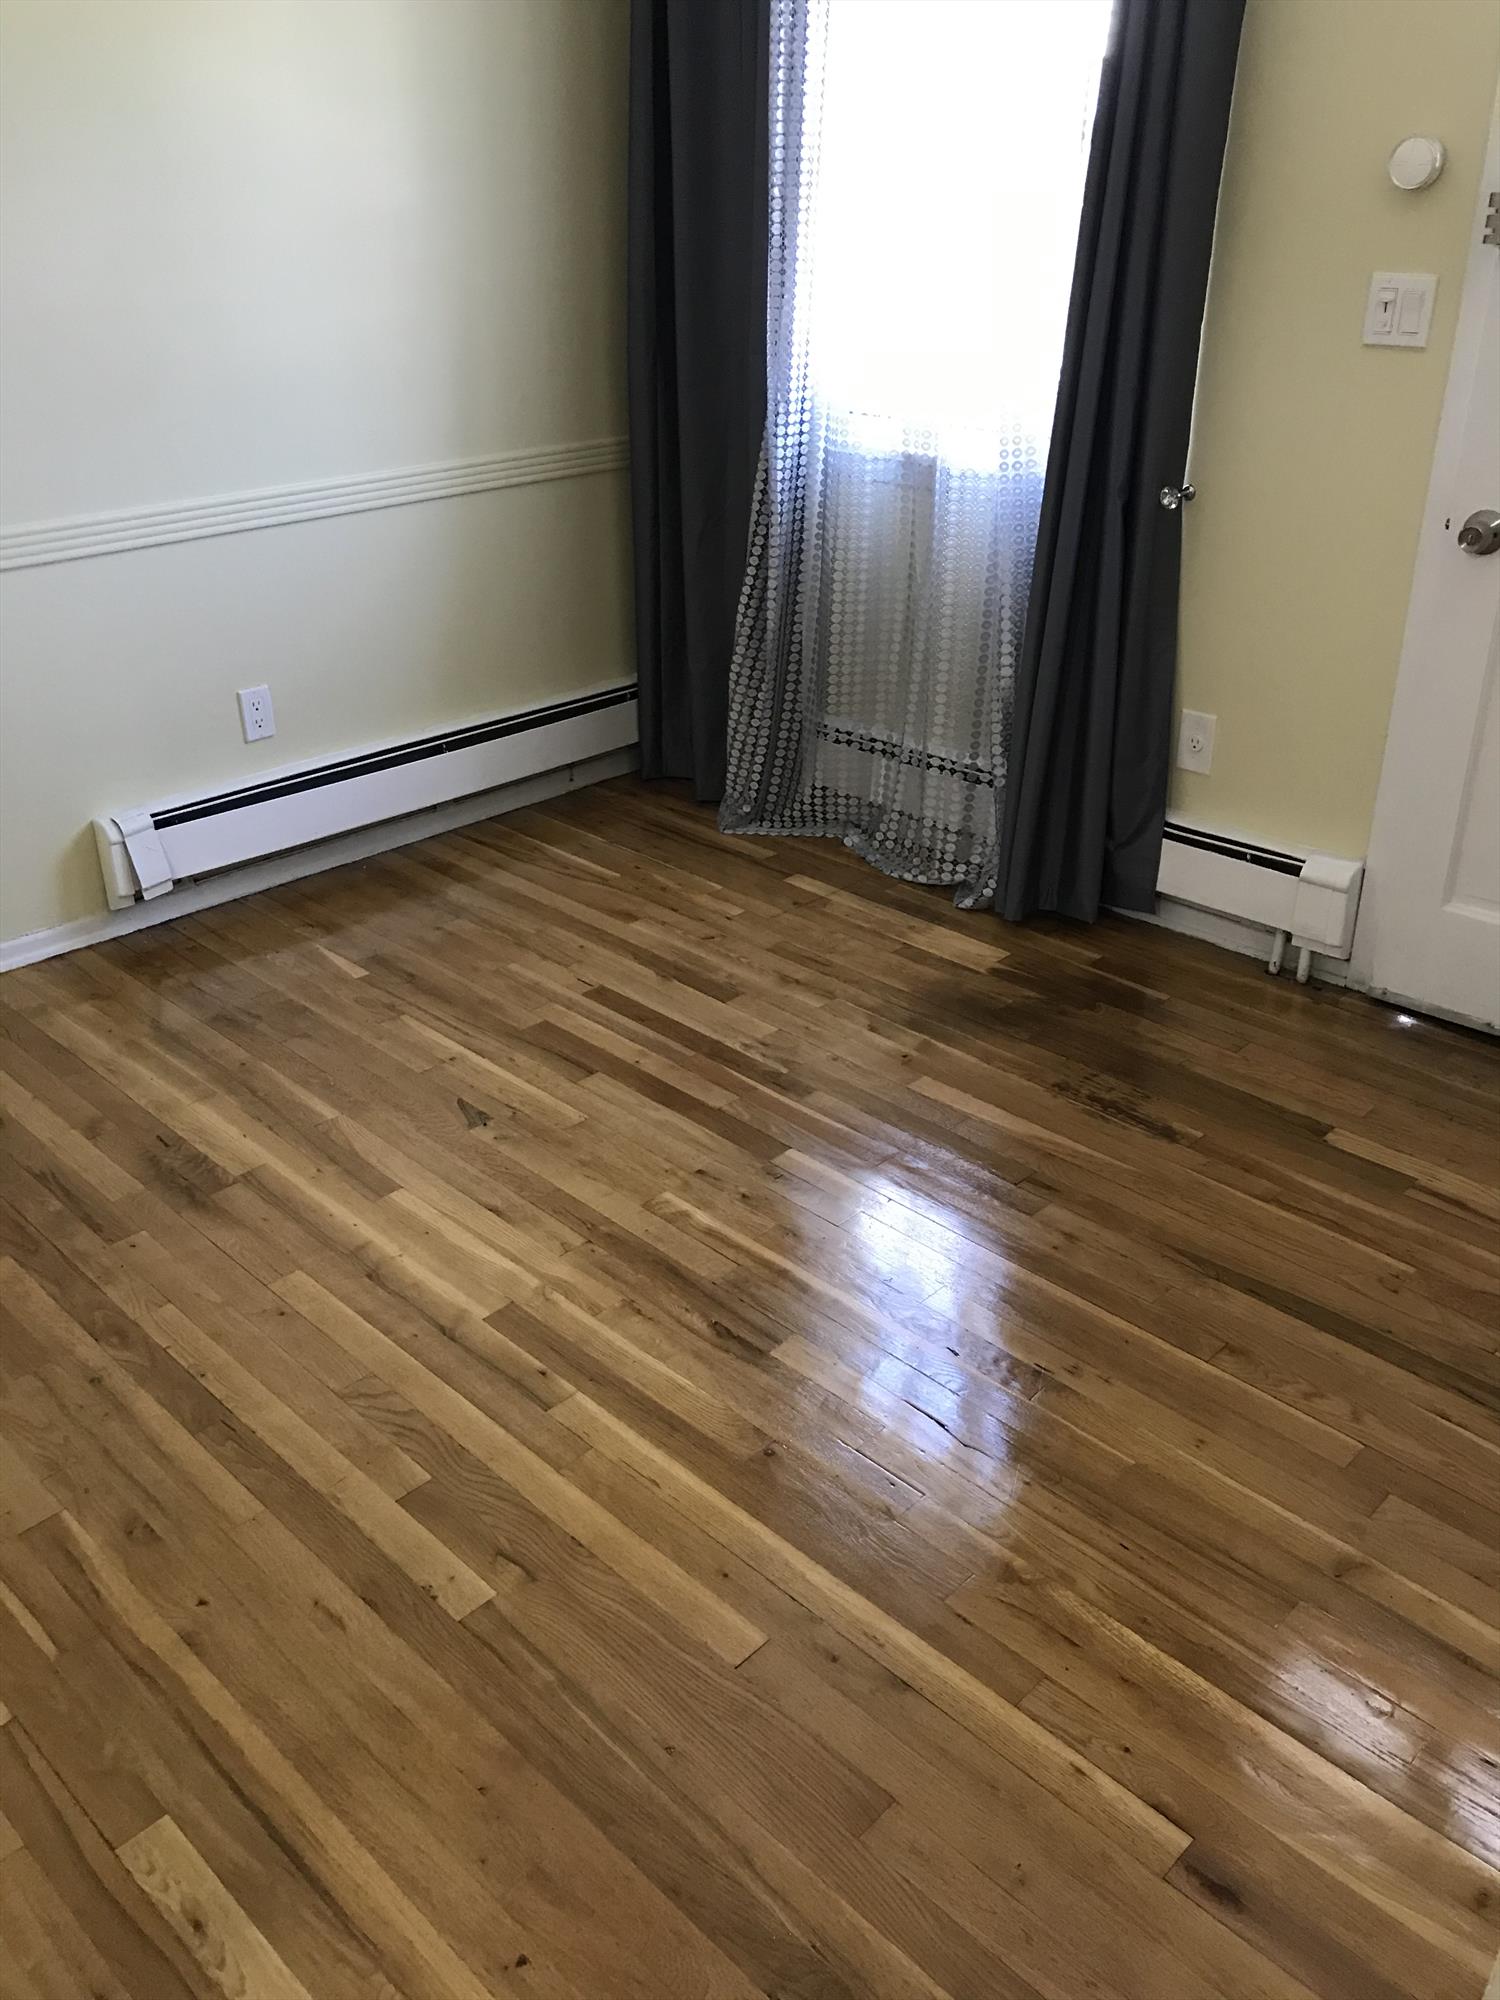 Lovely 1st Floor Apartment in Whitestone Features 2 Bedrooms, 1 Full Bath, Living Room, Dining Room, Renovated Kitchen and Bathroom. Rent Includes Heat! Great Location Close to stores and Transportation!